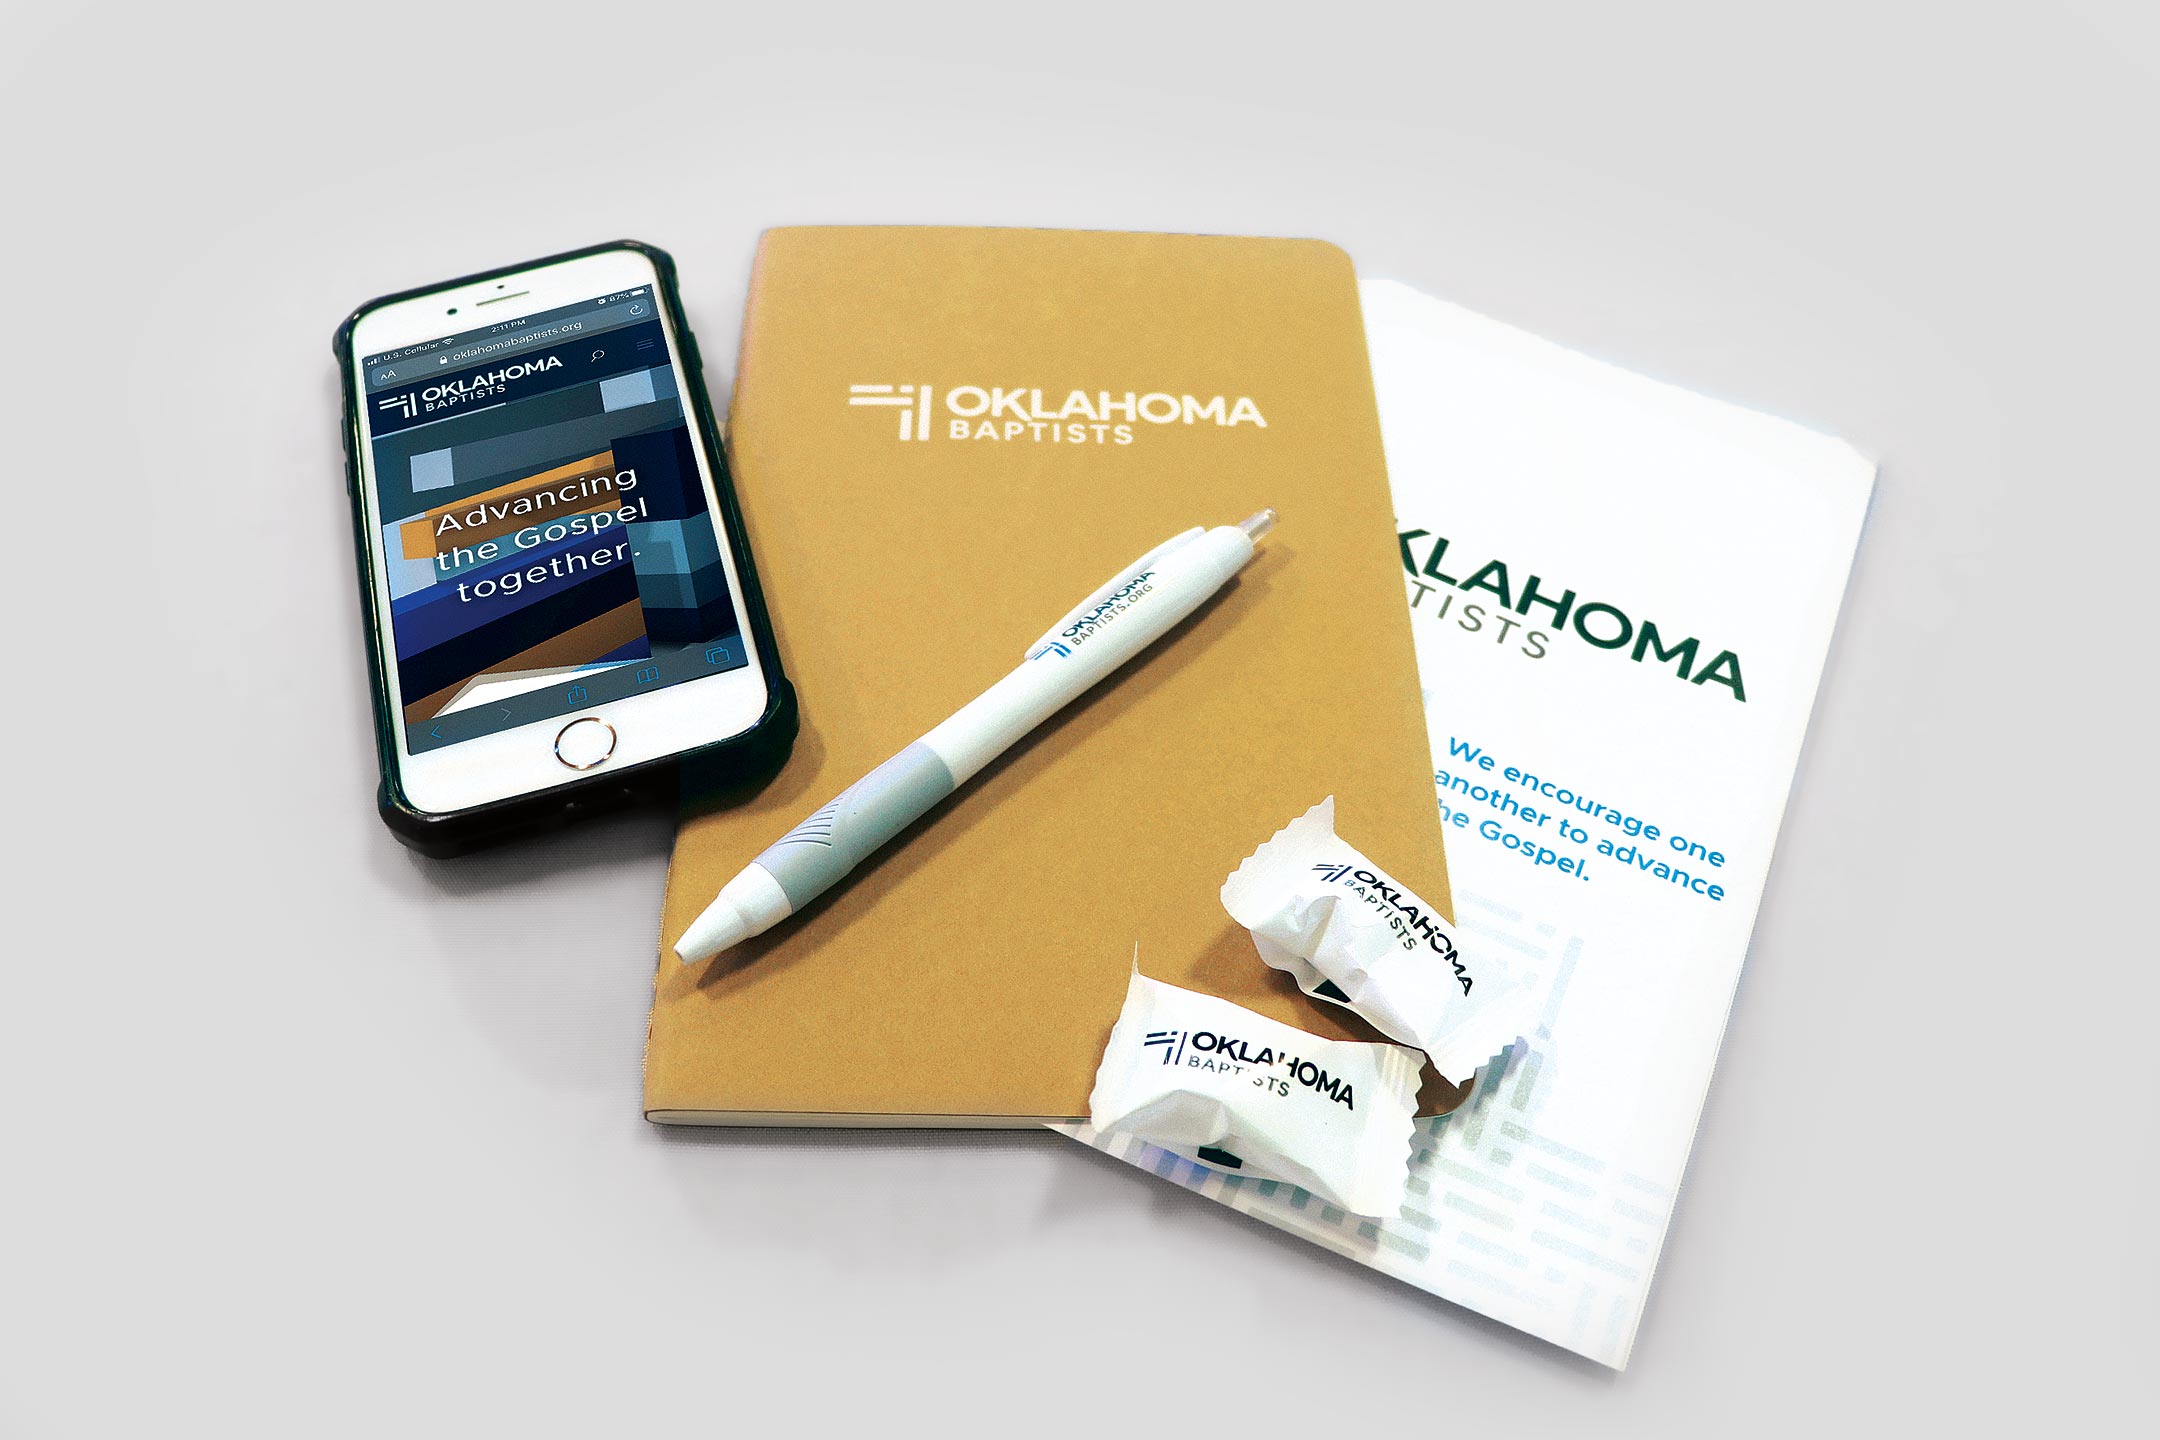 A collection of handout items branded out of the Oklahoma Baptists identity system